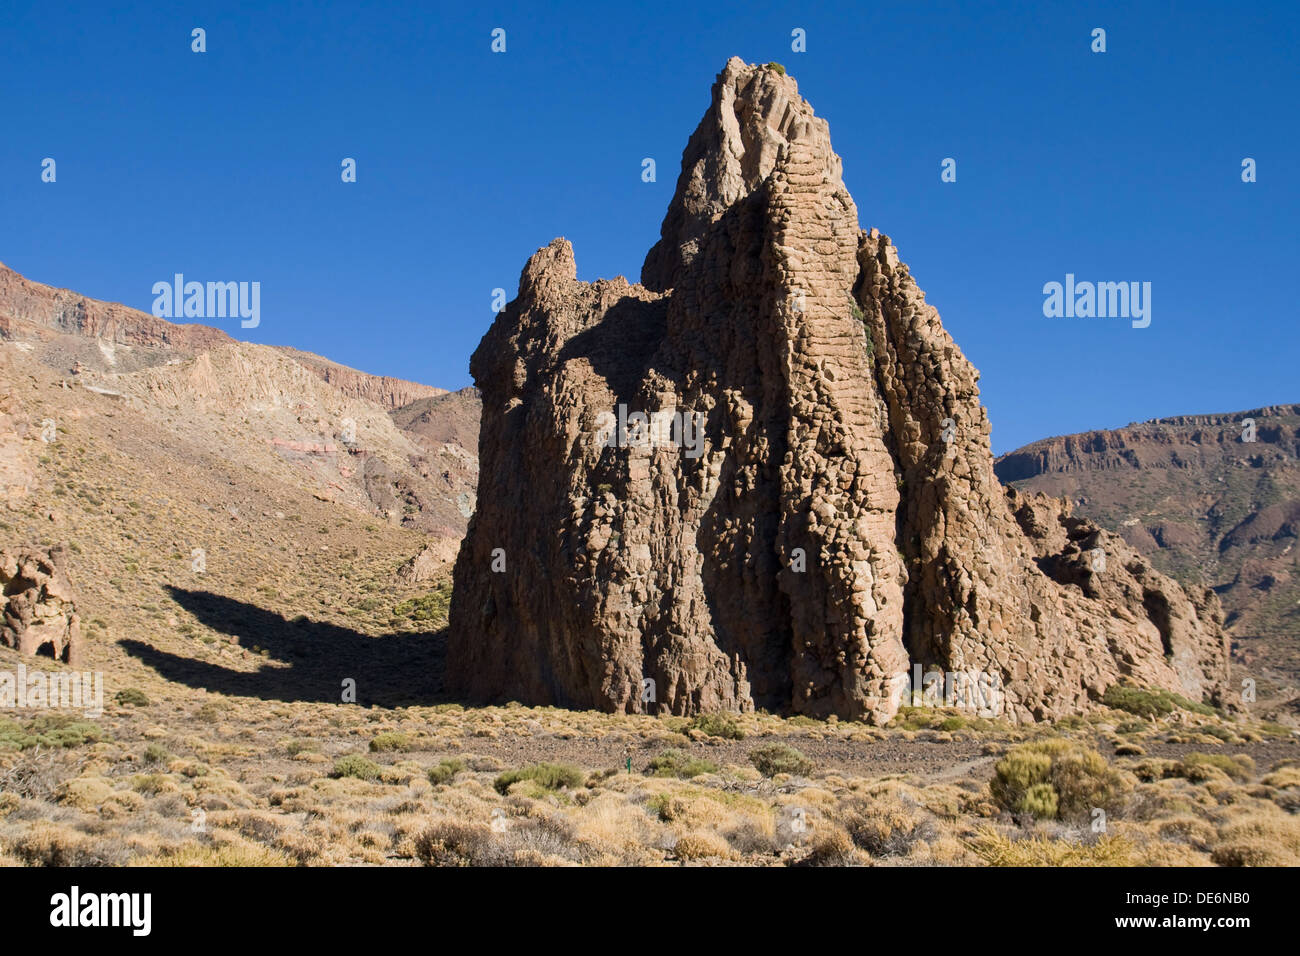 Phonolitic dome of La Catedral (The Cathedral) in the Teide National Park, Tenerife, Canary Islands. Stock Photo